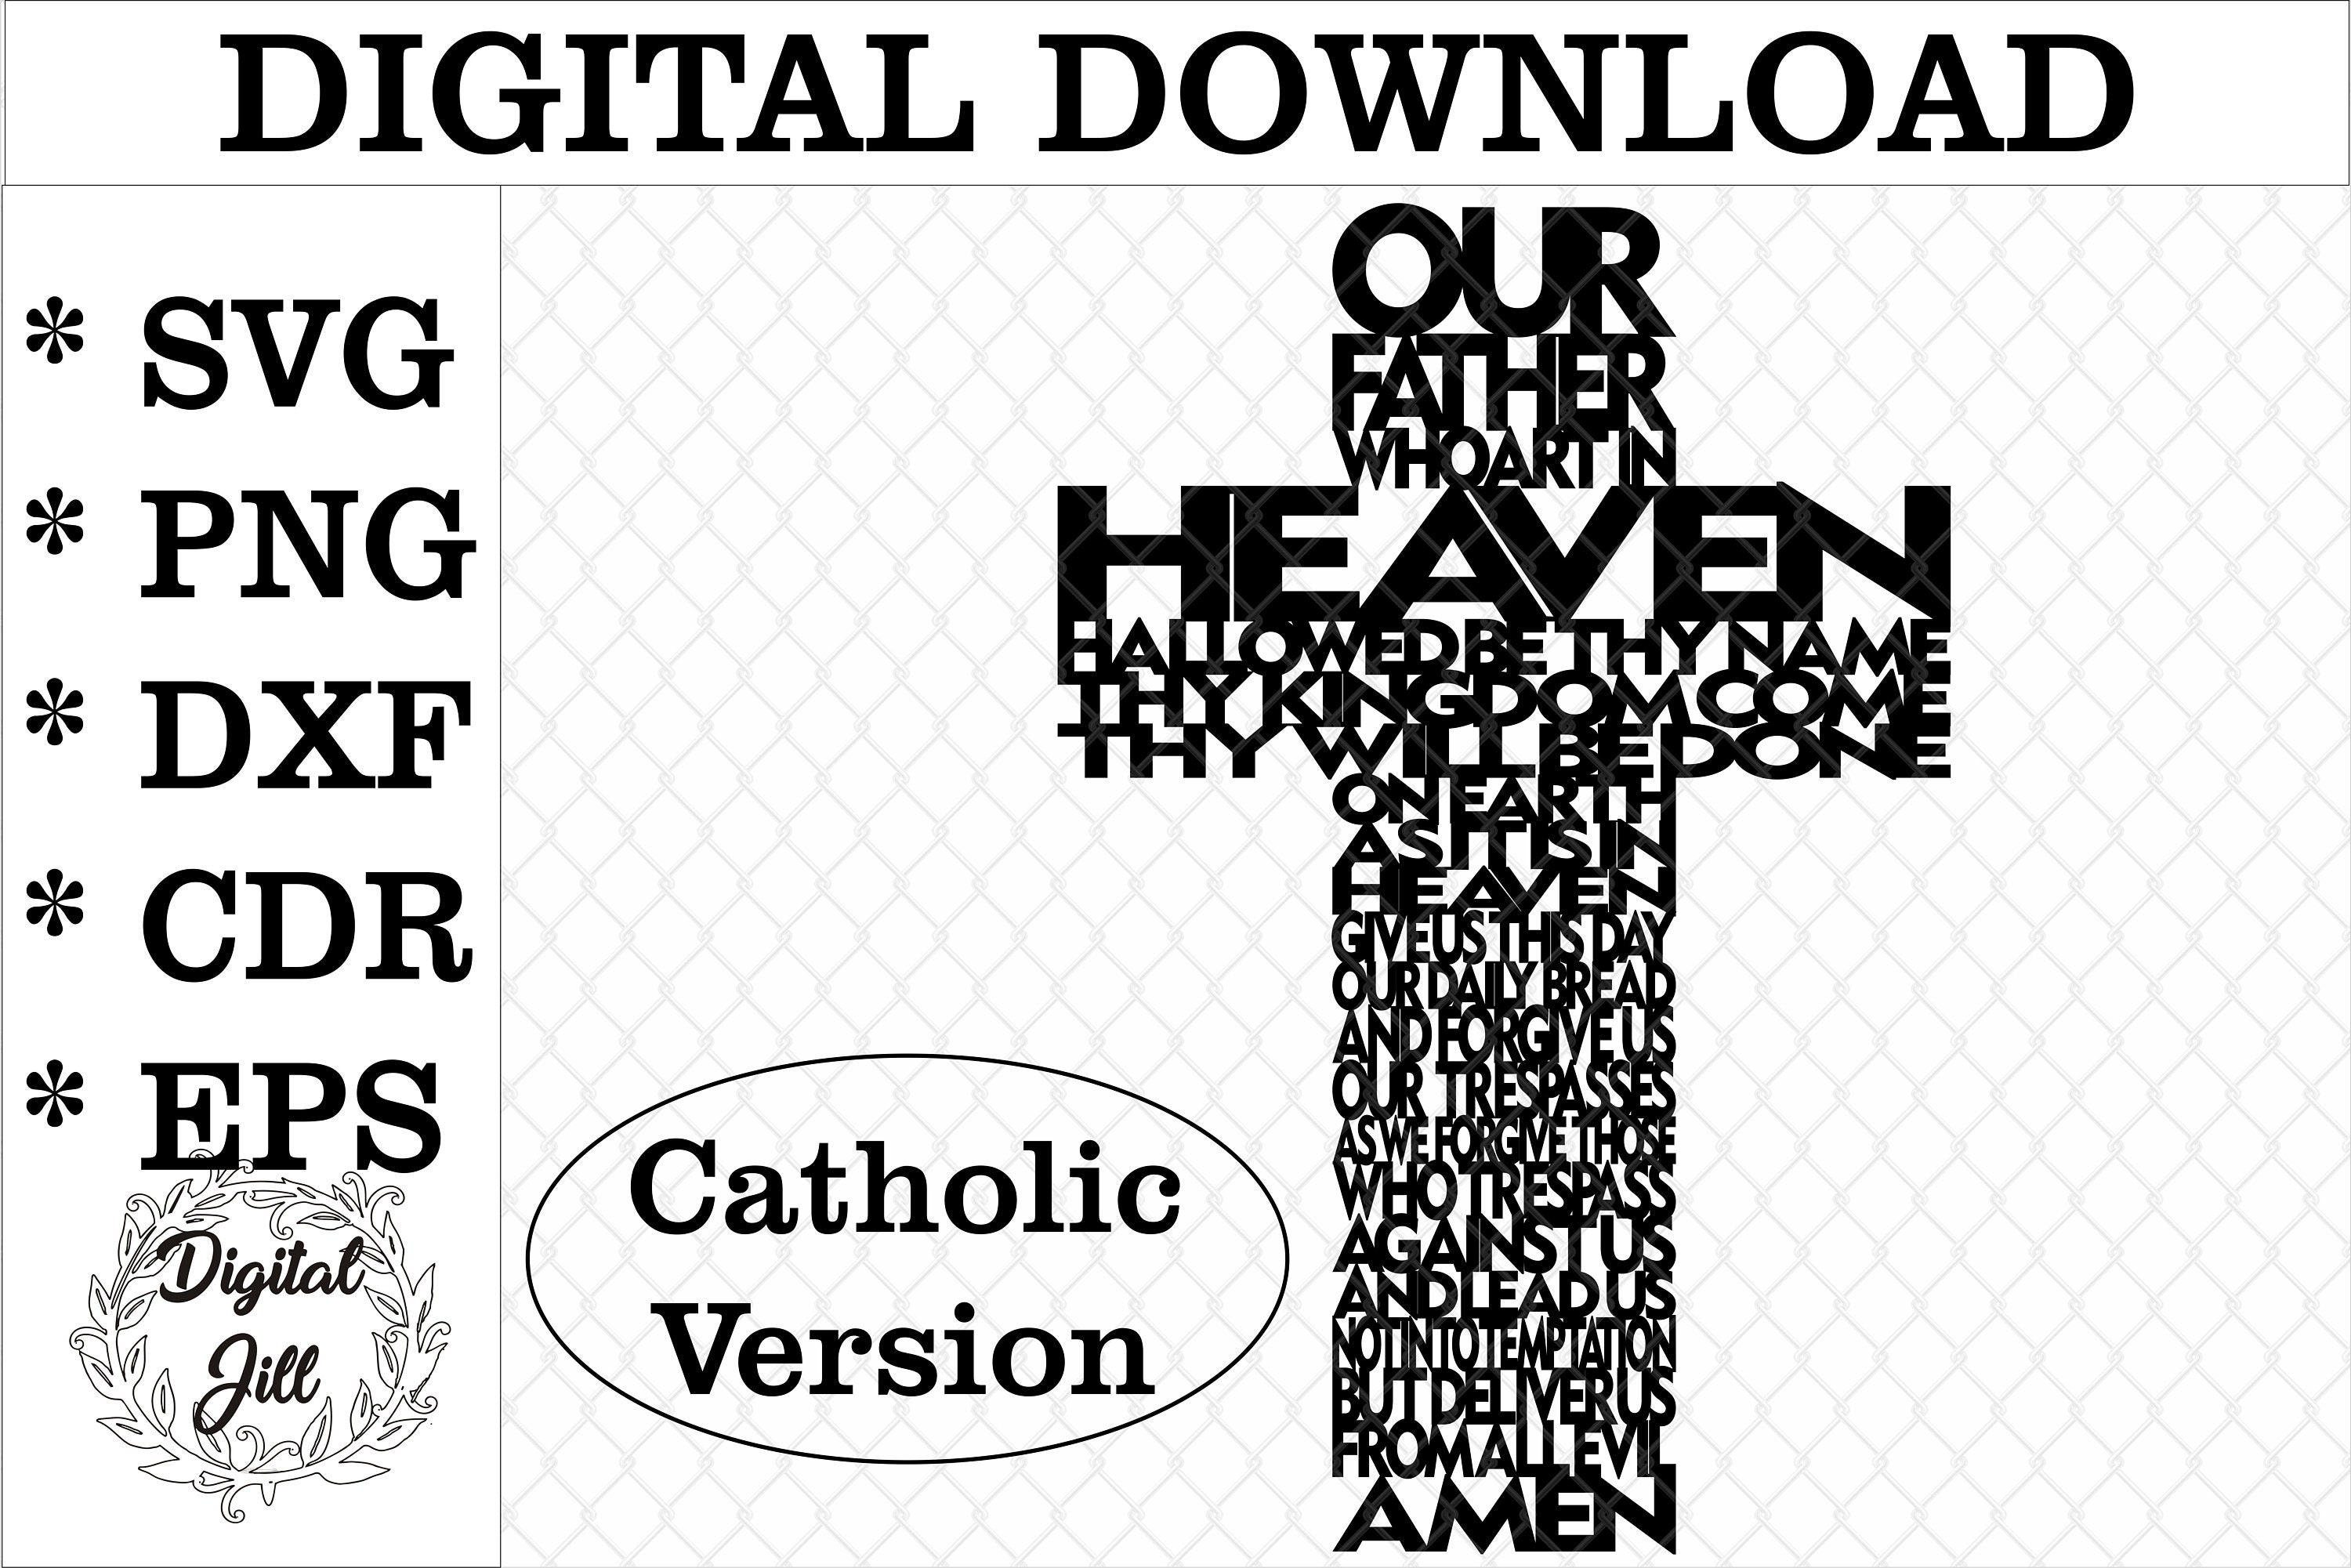 The Lord's Prayer Sticker Sheets — Illustrated Ministry